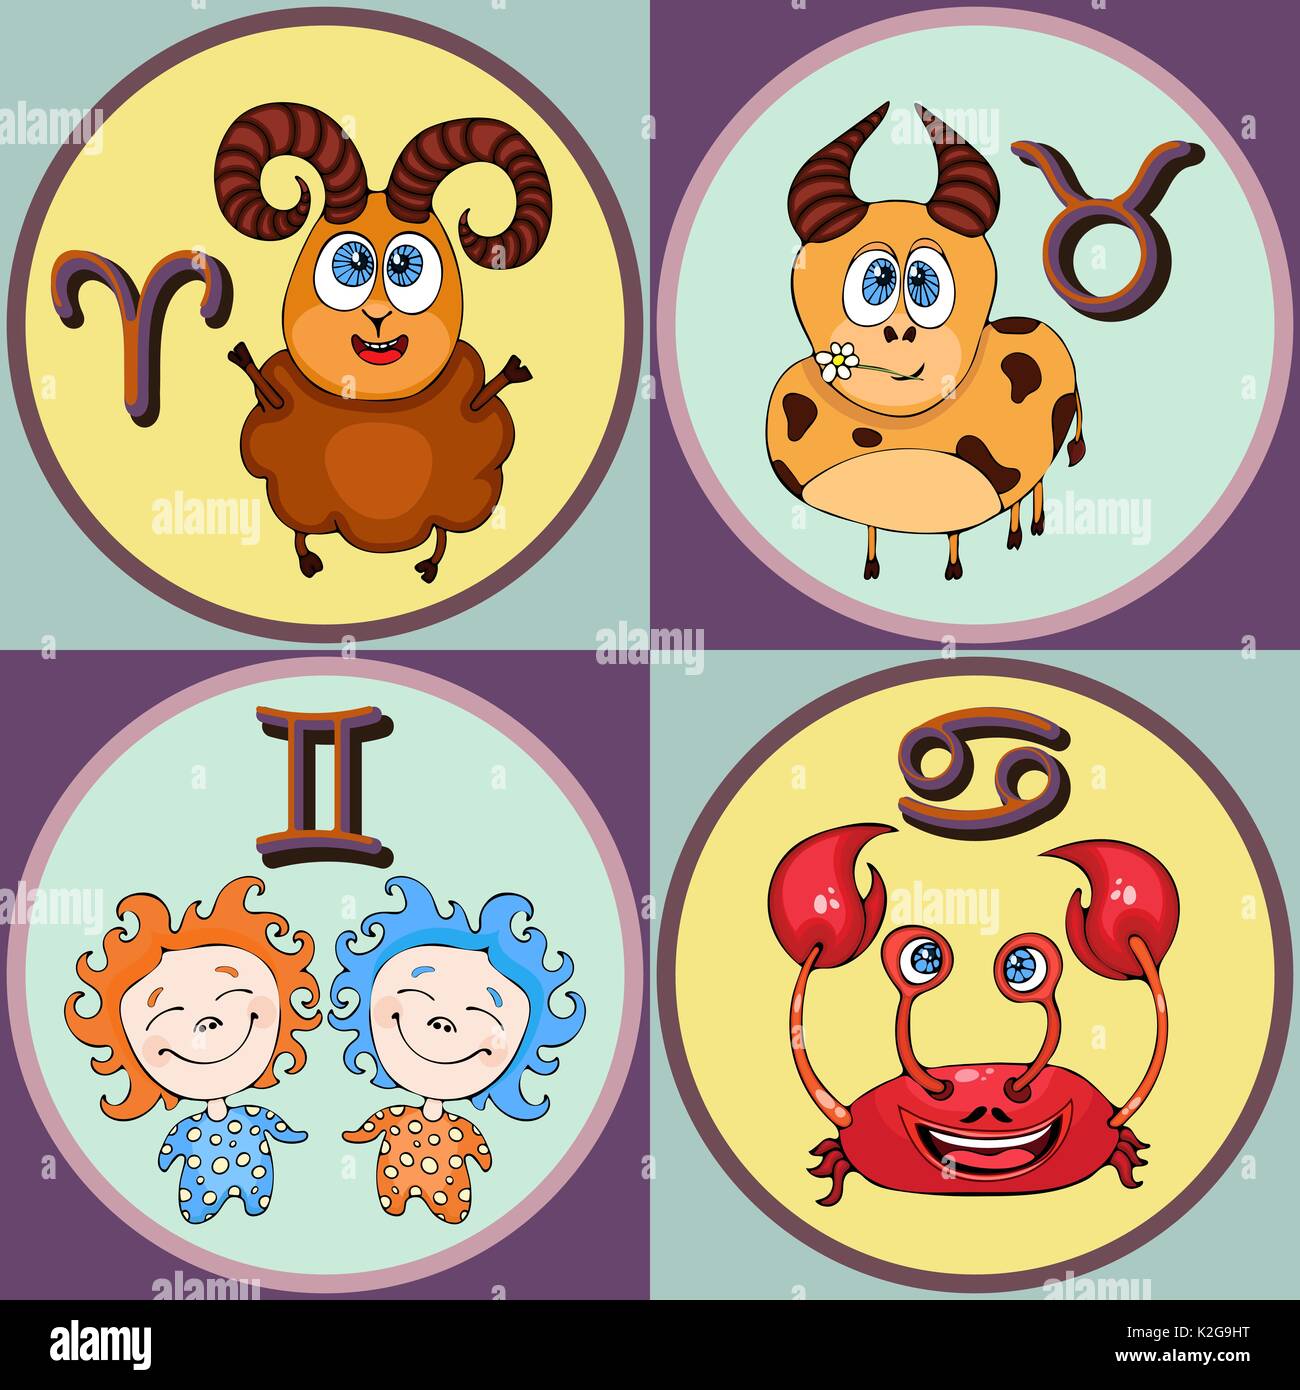 Set zodiac sign cartoon, Aries, Taurus, Gemini, Cancer. Painted funny astrological characters and symbols in a round frame multicolored on colorful ba Stock Vector